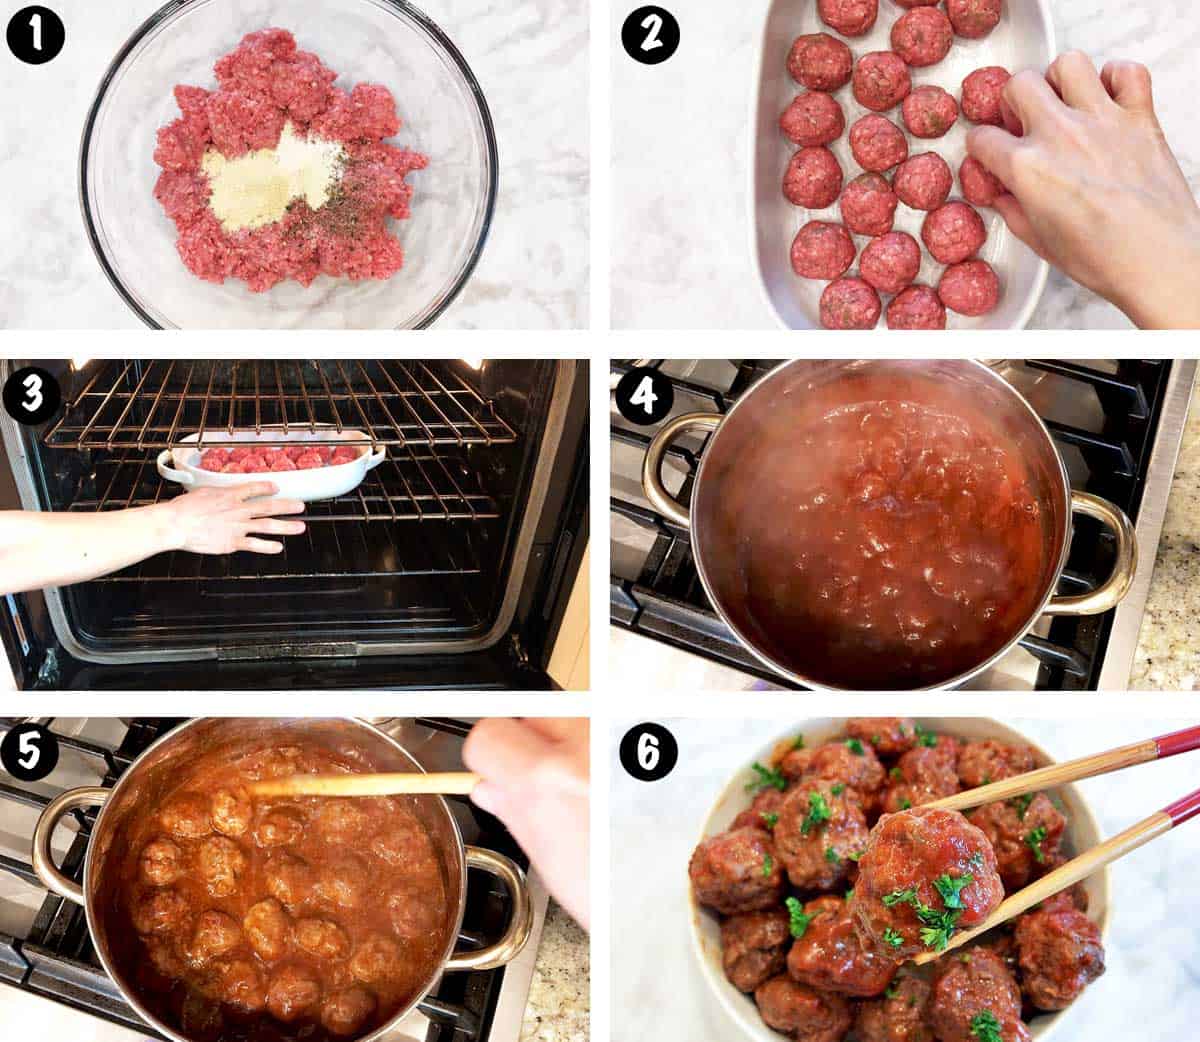 A photo collage showing the steps for making sweet and sour meatballs. 